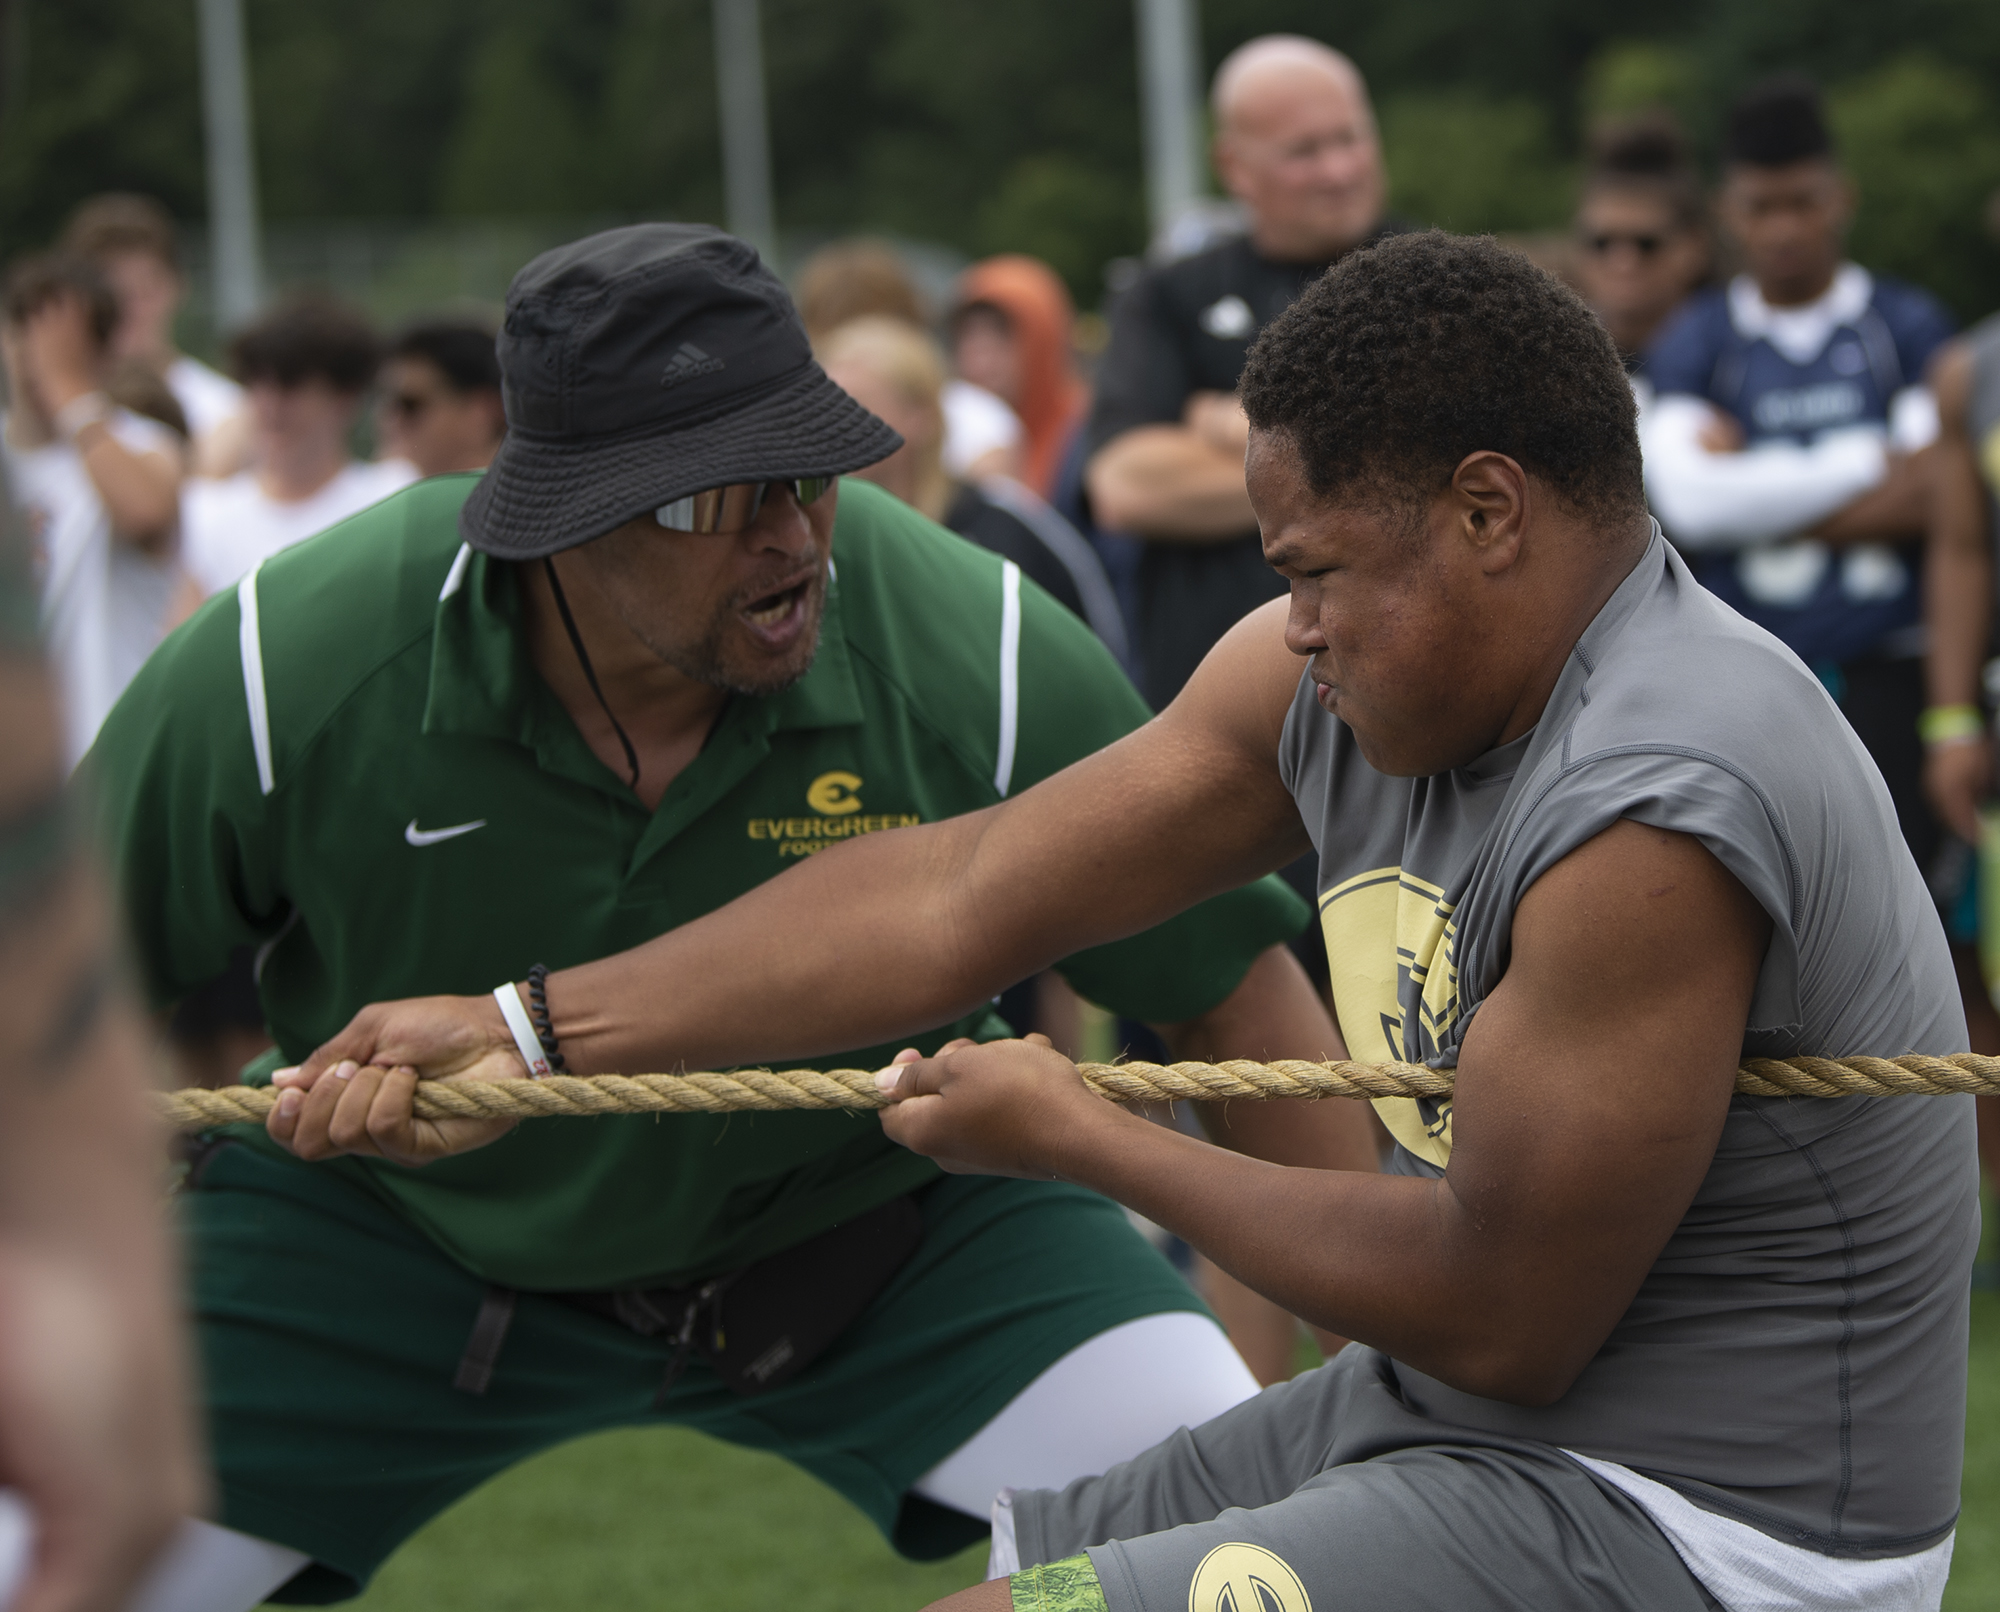 Evergreen assistant coach Tafiko Salu urges on Mahki Miller during the tug-o-war at the Rumble at the River 7-on-7 Tournament and Linemen Challenge at Union High School on Saturday, July 23, 2022.